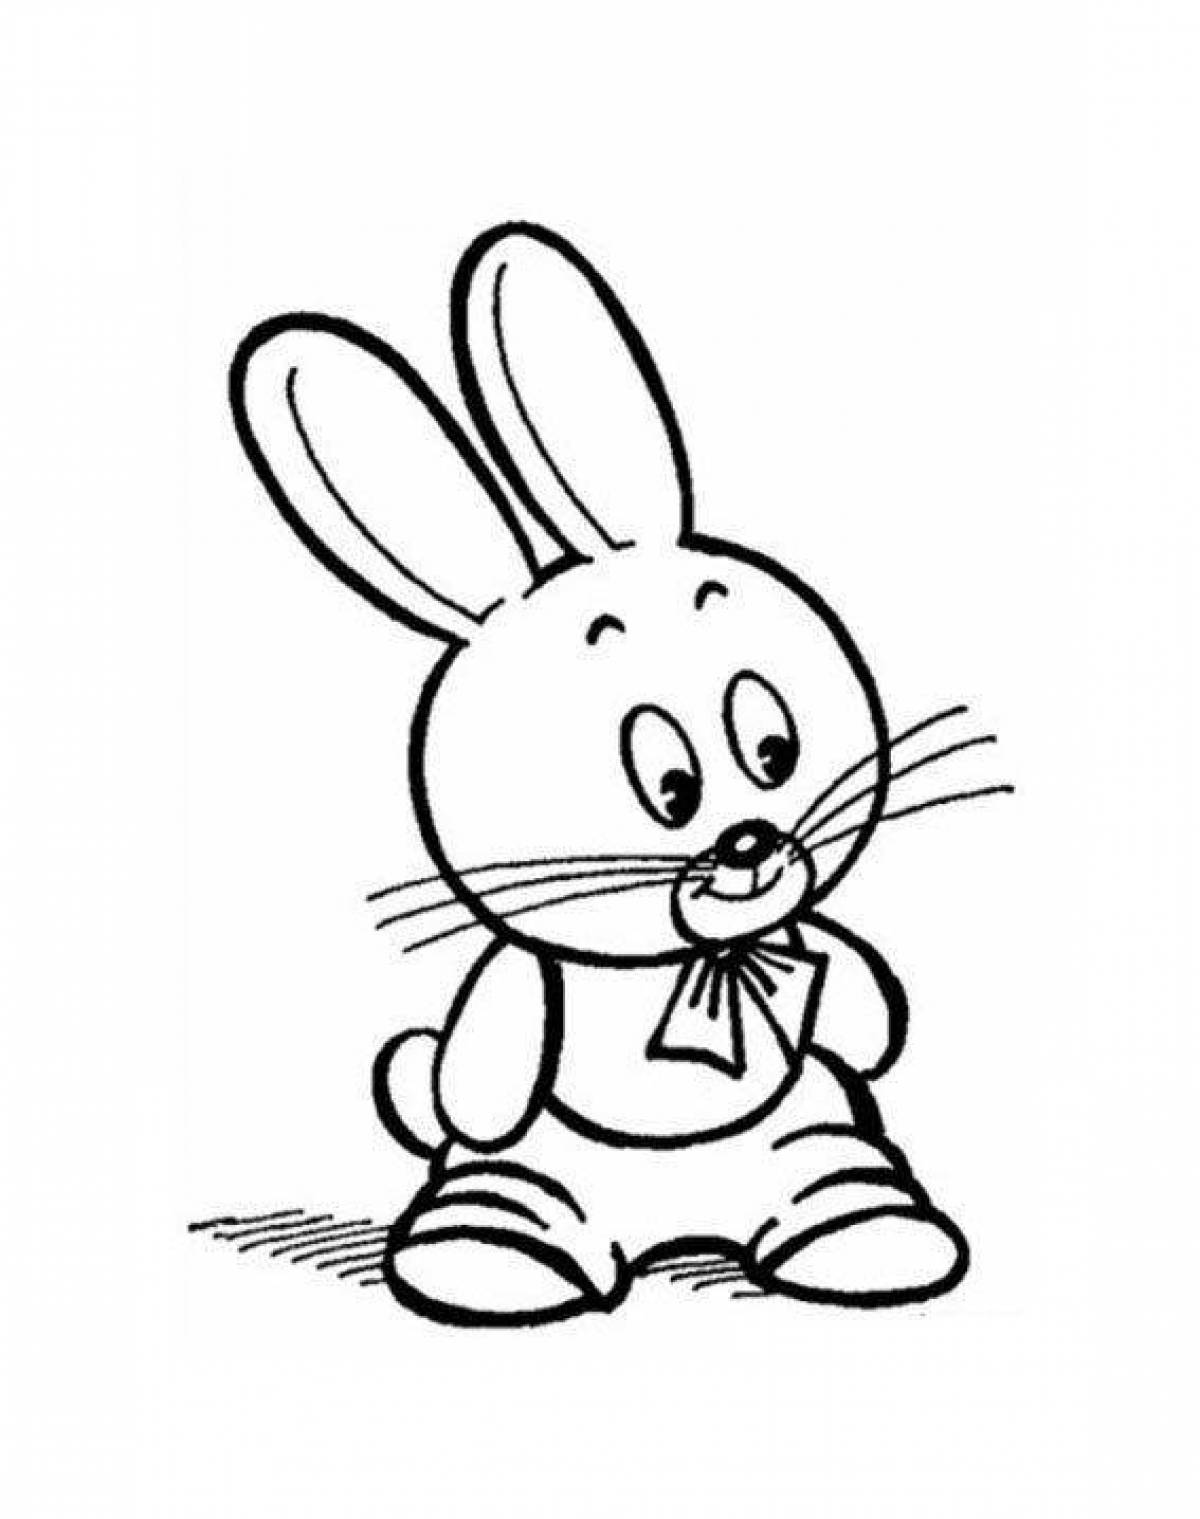 Gorgeous coloring page rabbit drawing